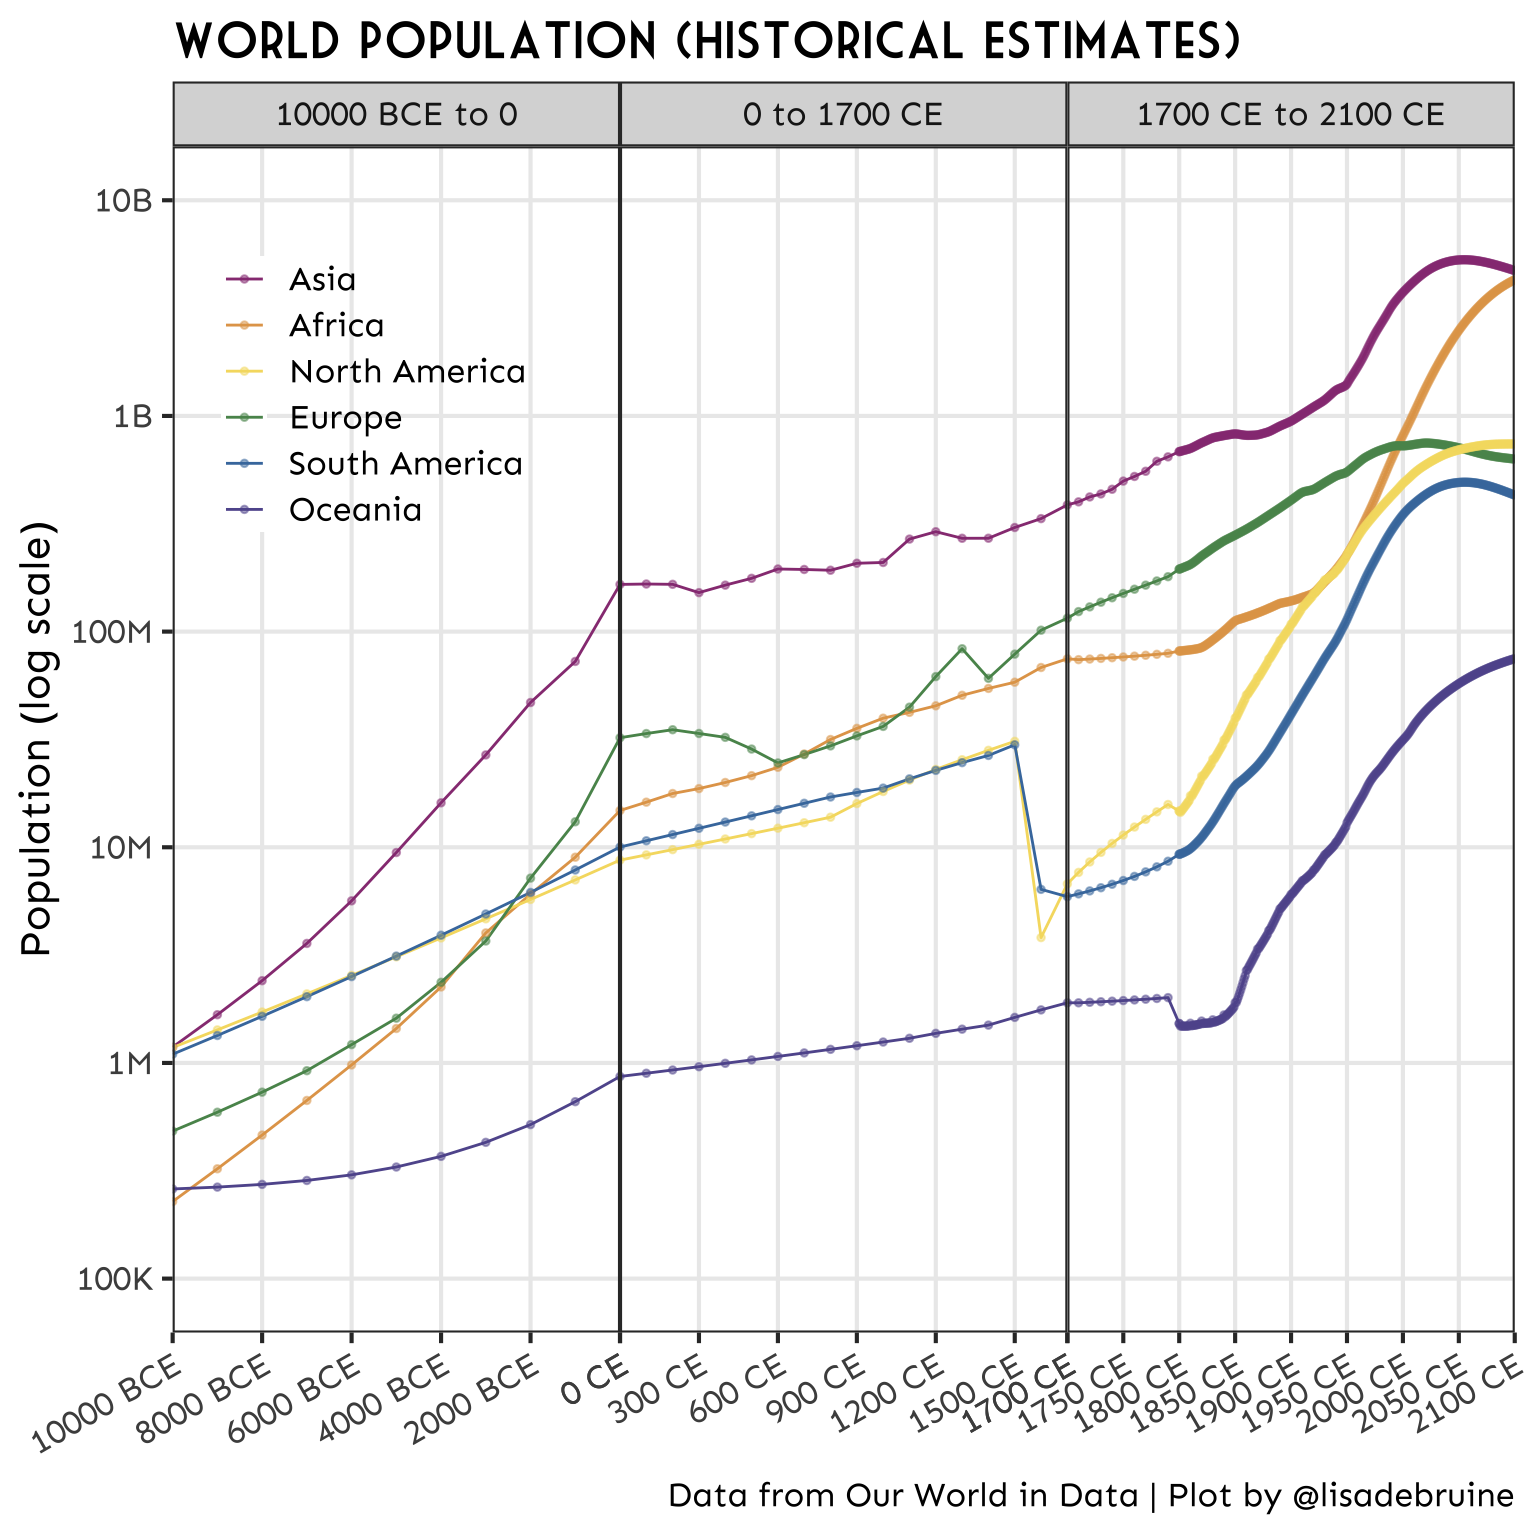 World population estimates from 10000 BCE to 2021 CE for Asia, Africa, Europe, North America, South America, and Oceania. The plot is divided in 3 parts -- 10000 BCE to 0, 0 to 1700 CE, and 1700CE to 2021 CE.